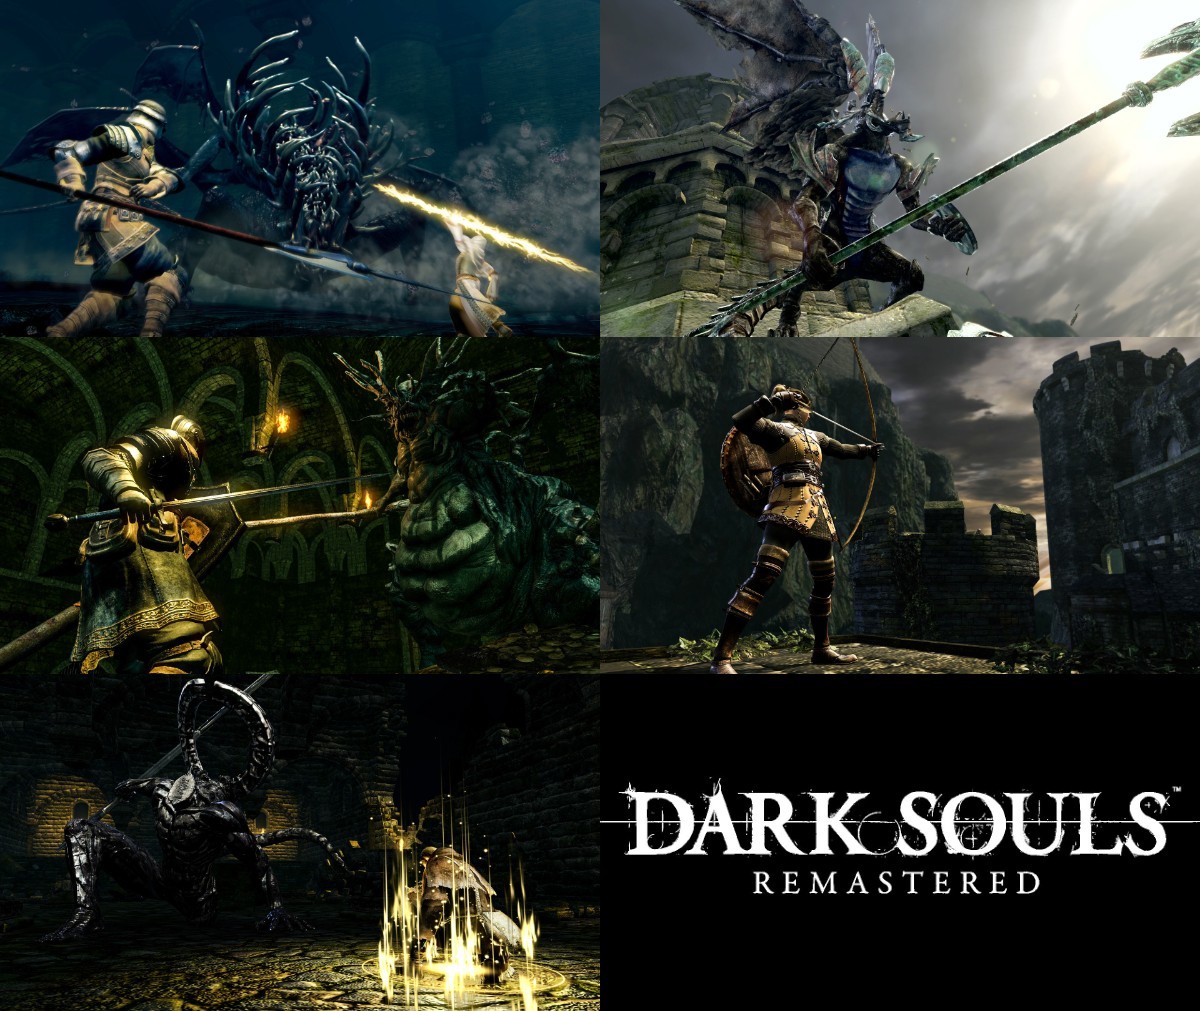 Dark Souls Remastered [Repack] by Wanterlude VsBF7A7i_o